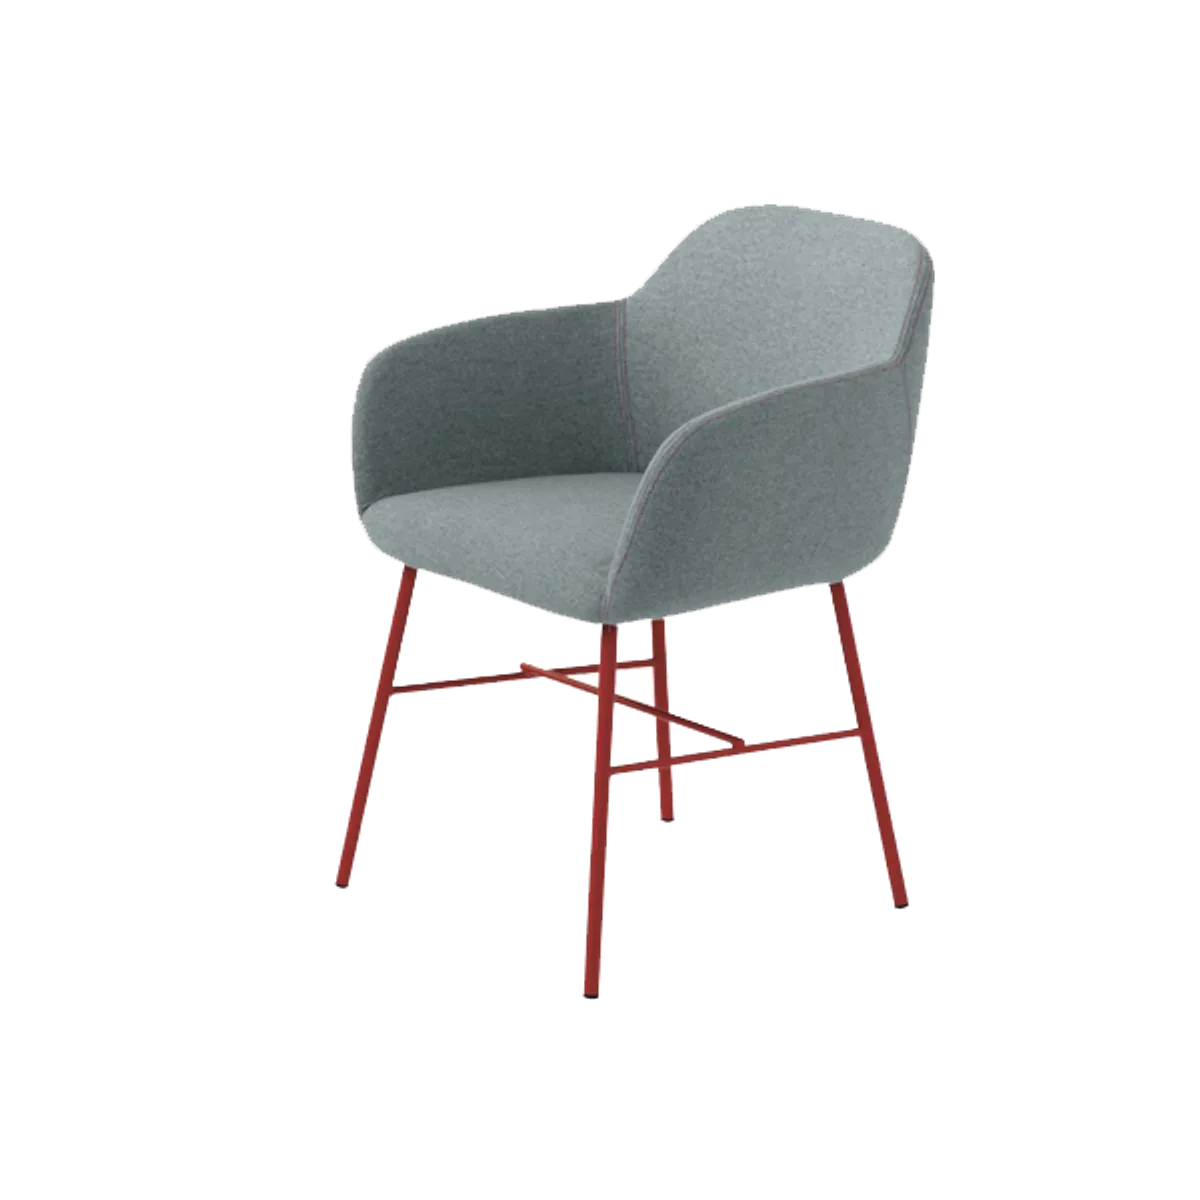 Myrametalarmchair Inside Out Contracts